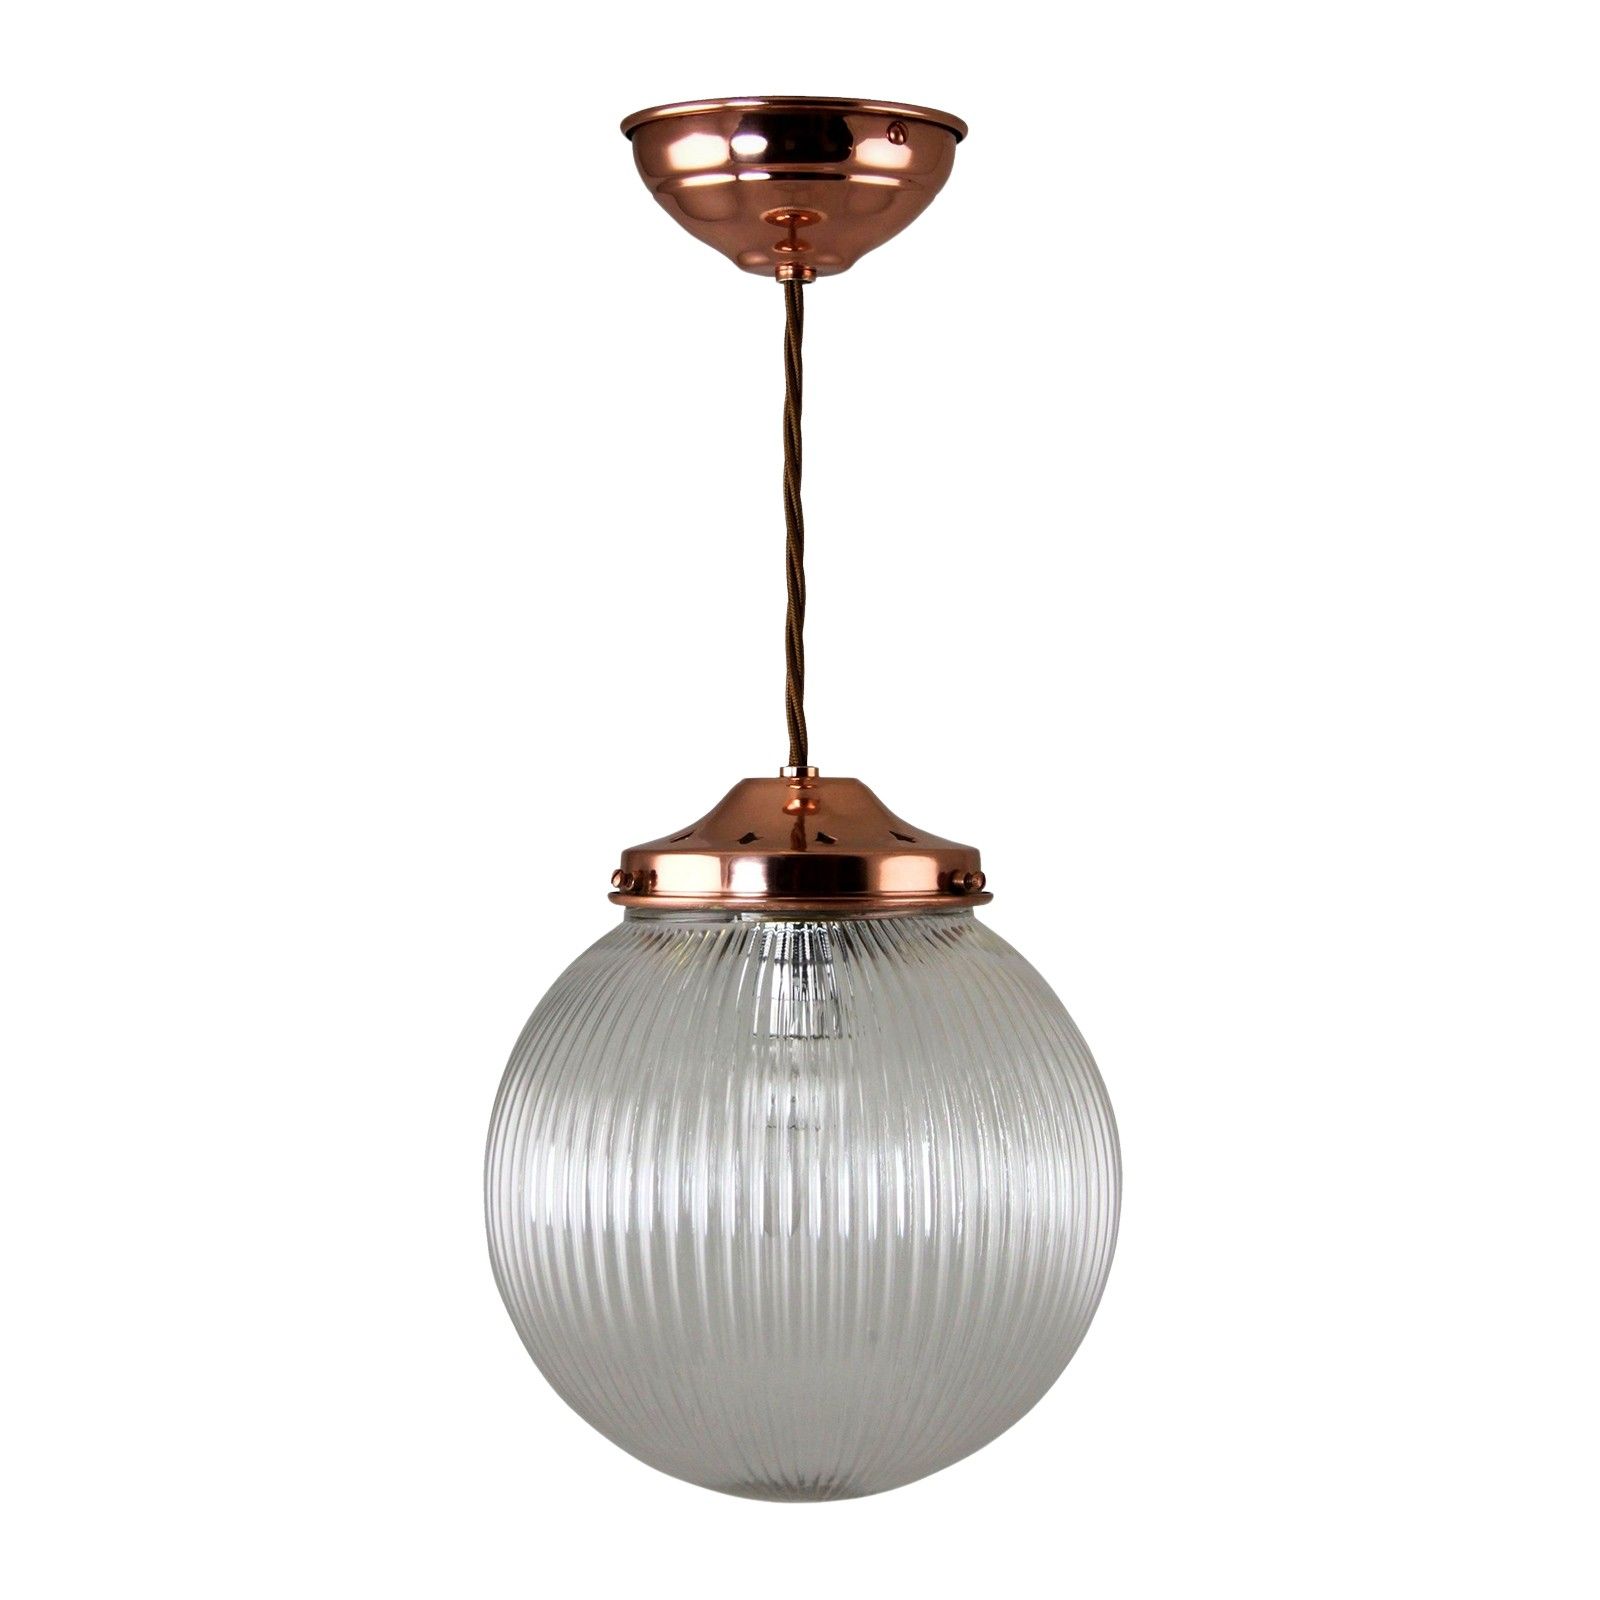 Reeded glass globe ceiling light with polished copper metalwork